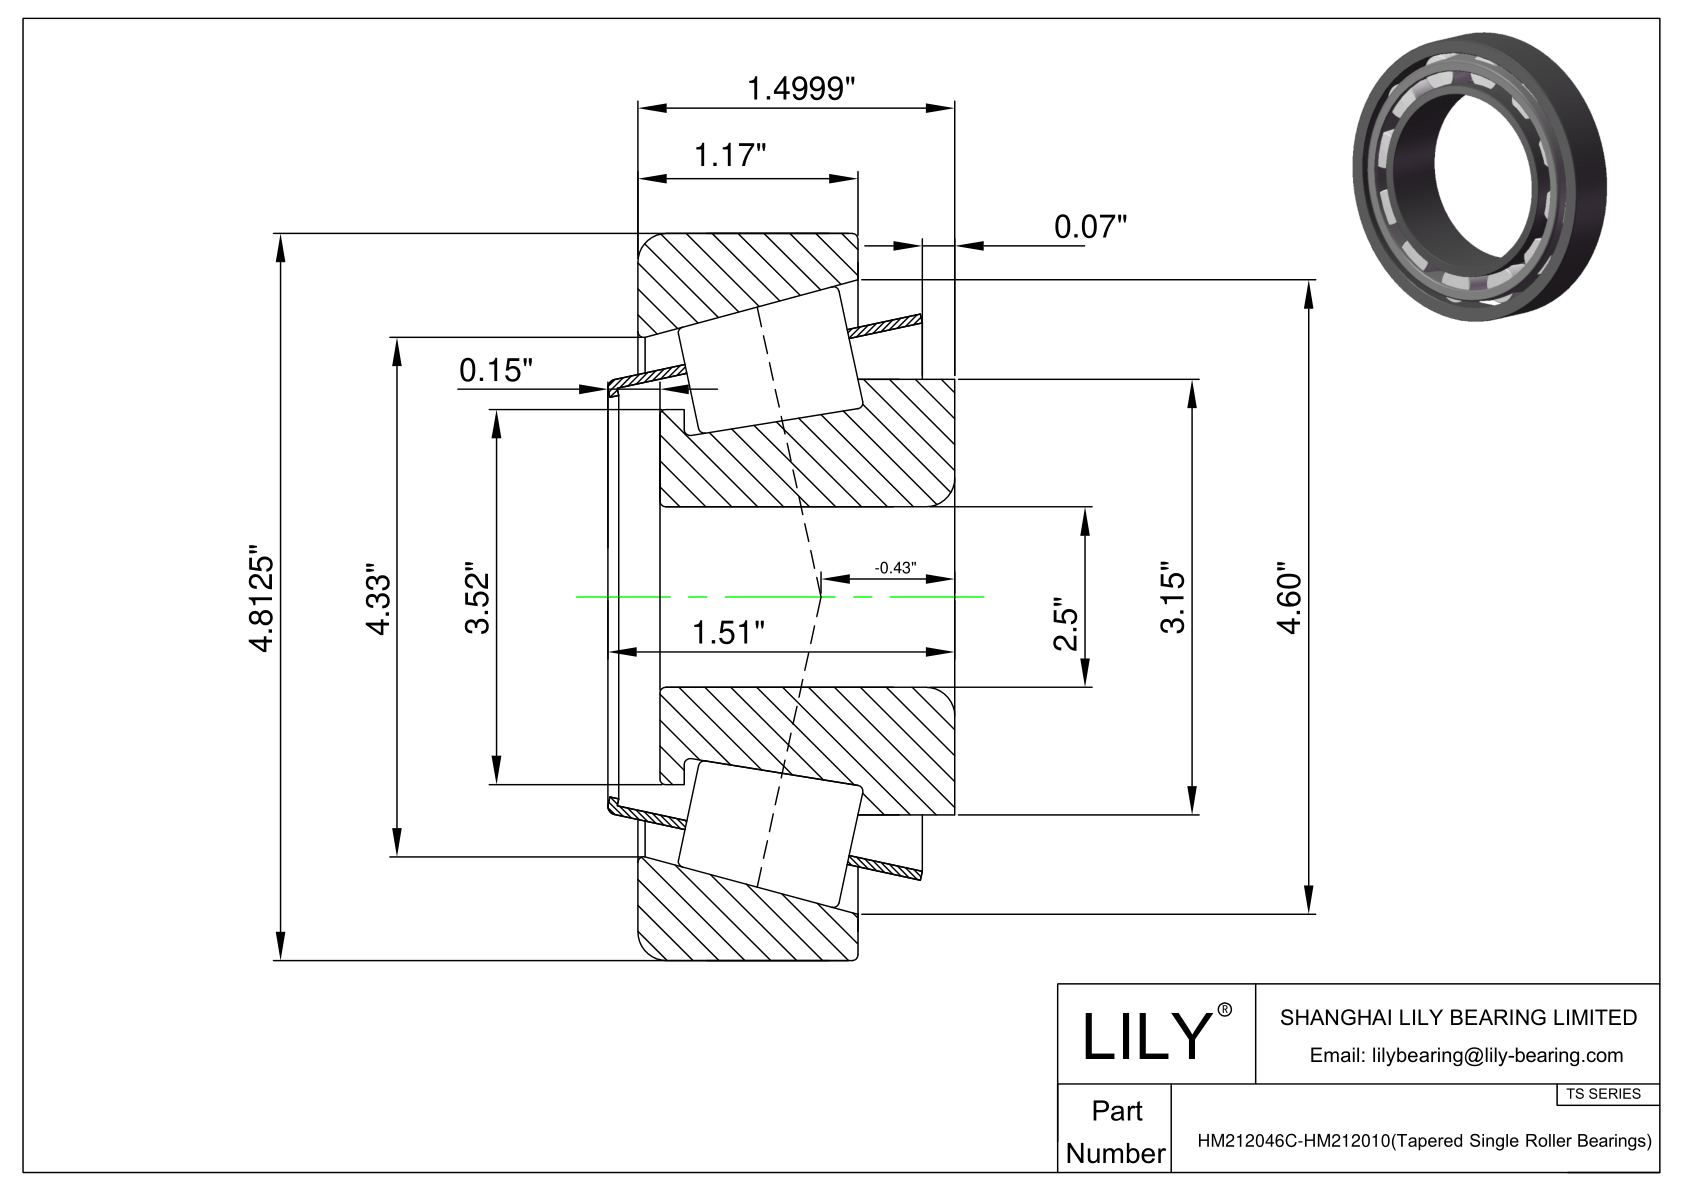 HM212046C-HM212010 TS (Tapered Single Roller Bearings) (Imperial) cad drawing